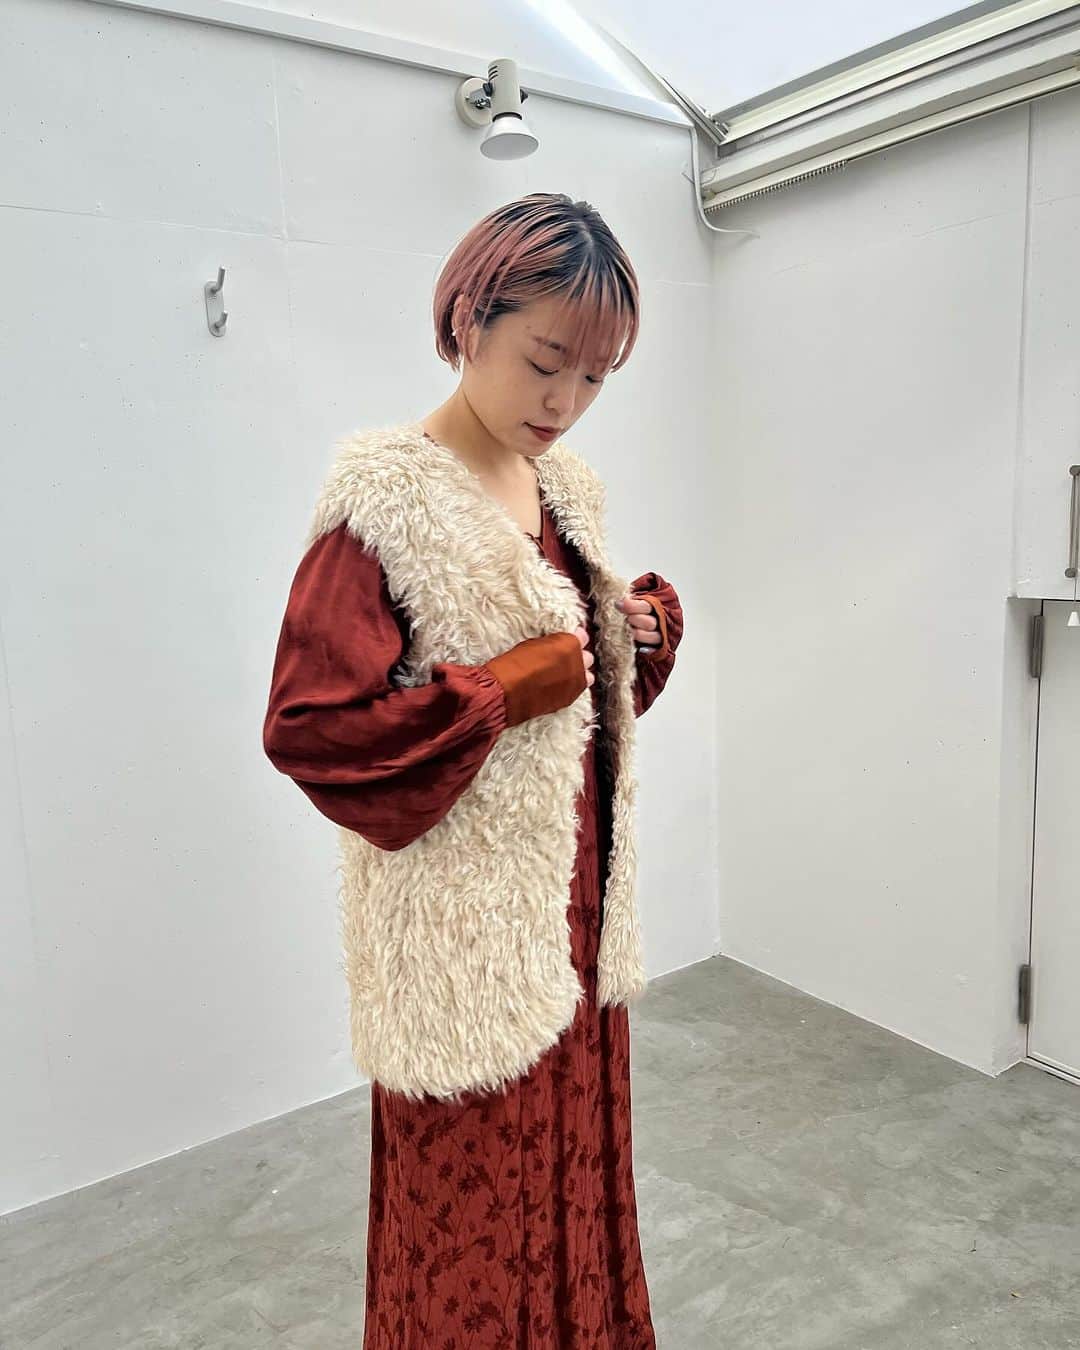 MIDWEST TOKYO WOMENのインスタグラム：「・ NOUNLESS POPUP 11/25(土)〜12/3(日) @_nounless  @midwest_tw   item 【dress】 gerbera jacquad dress @_nounless  brown , black / size 1,2  【vest】 fur like warm knit vest @_nounless  beige , blue , brown / size free  【boot】 ankle boot @mm6maisonmargiela  black / size 36〜38  @midwest_official  staff 160cm  _______ _______ _______ _______ _______  MIDWEST TOKYO ☎︎03-5428-3171 ✉︎tokyo_w@midwest.jp  月〜土 12:00〜20:00 日・祝 11:00〜19:00  商品に関してのご質問、その他ございましたら お気軽にコメント、DMください。」